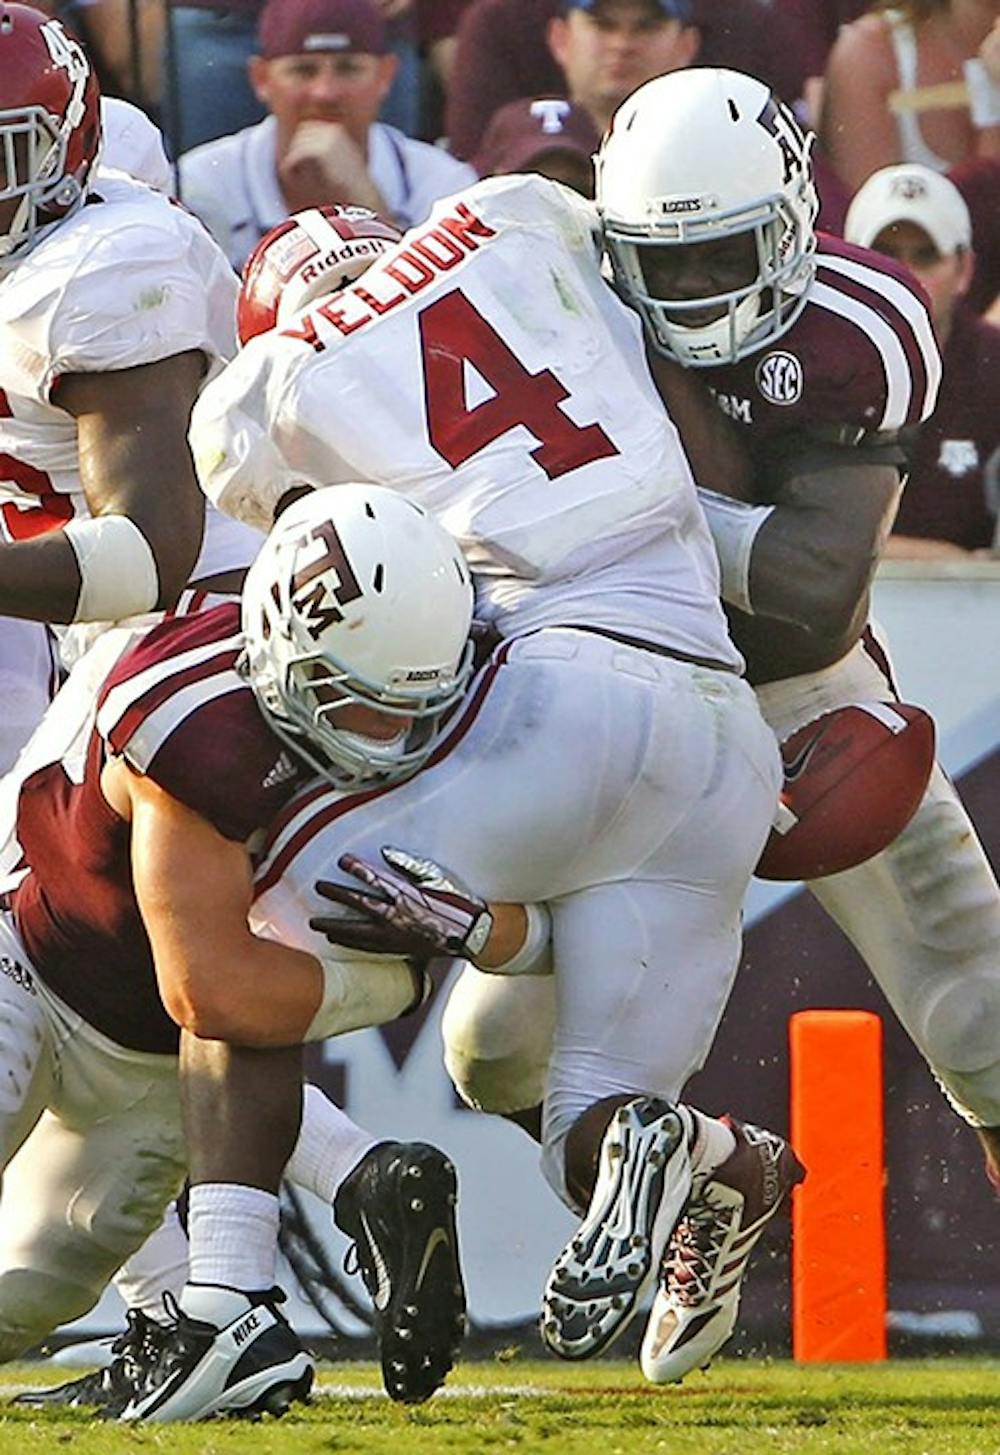 Texas A&amp;M Aggies linebacker Brett Wade, left, and linebacker Steven Jenkins, right, force a fumble by Alabama Crimson Tide running back T.J. Yeldon during the second half at Kyle Field in College Station, Texas, Saturday, September 14, 2013. Alabama defeated Texas A&amp;M, 49-42. (G.J. McCarthy/Dallas Morning News/MCT)